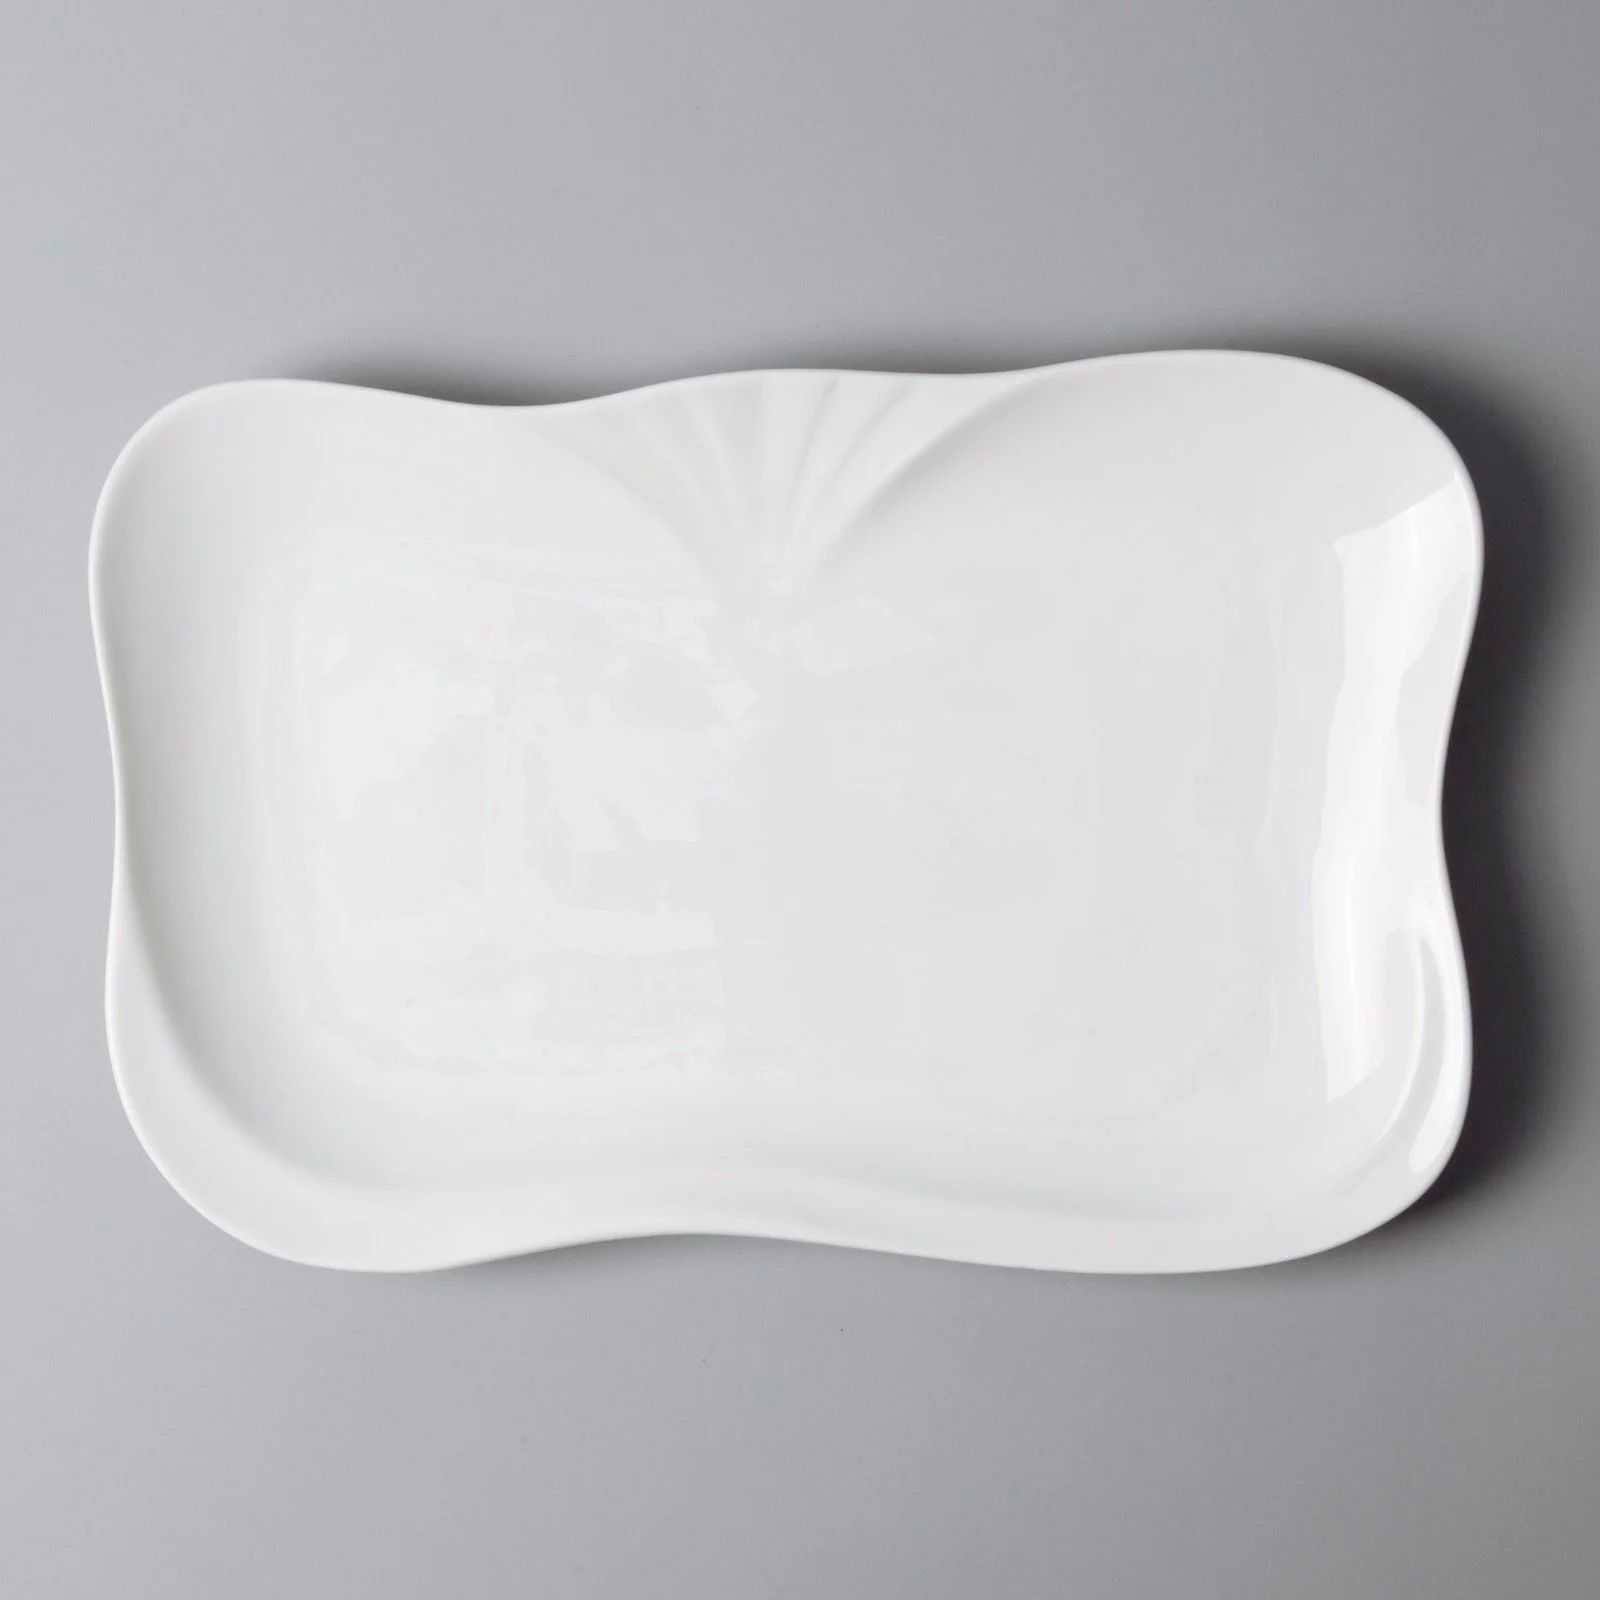 Two Eight Brand color round custom white porcelain tableware